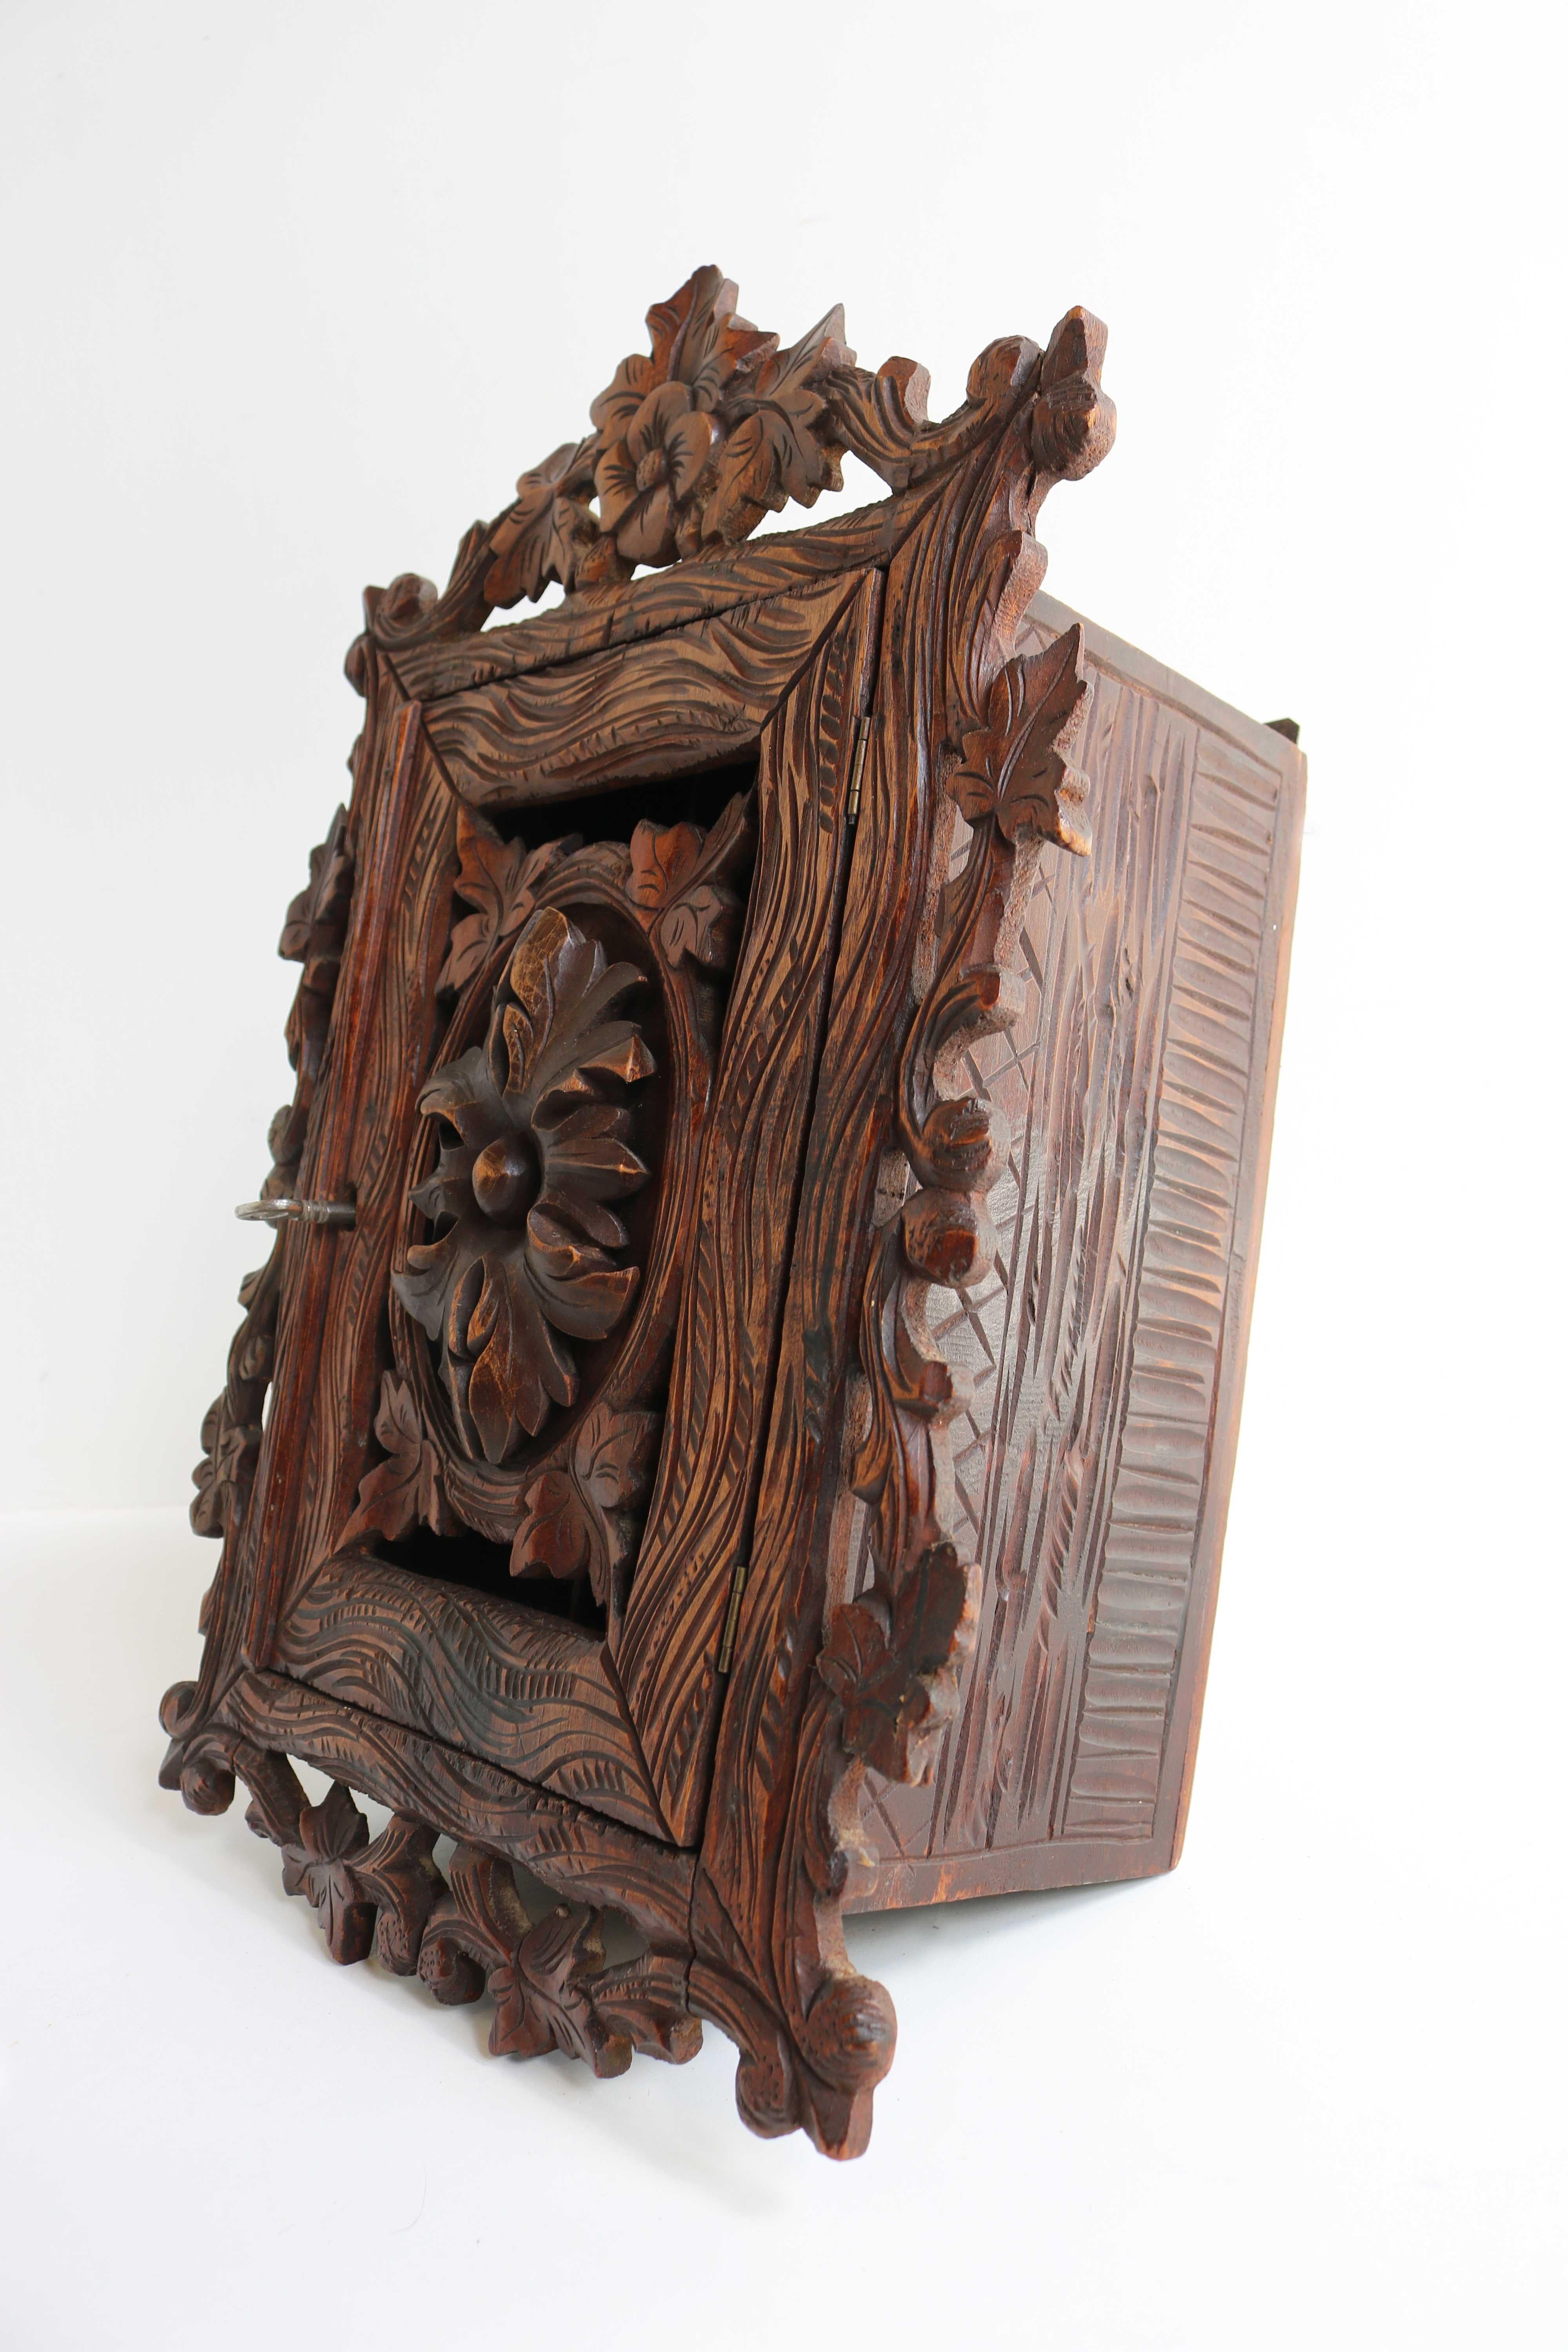 Black Forest Carved Wall Cabinet, Apothecary, Antique Swiss, 19th Century 5